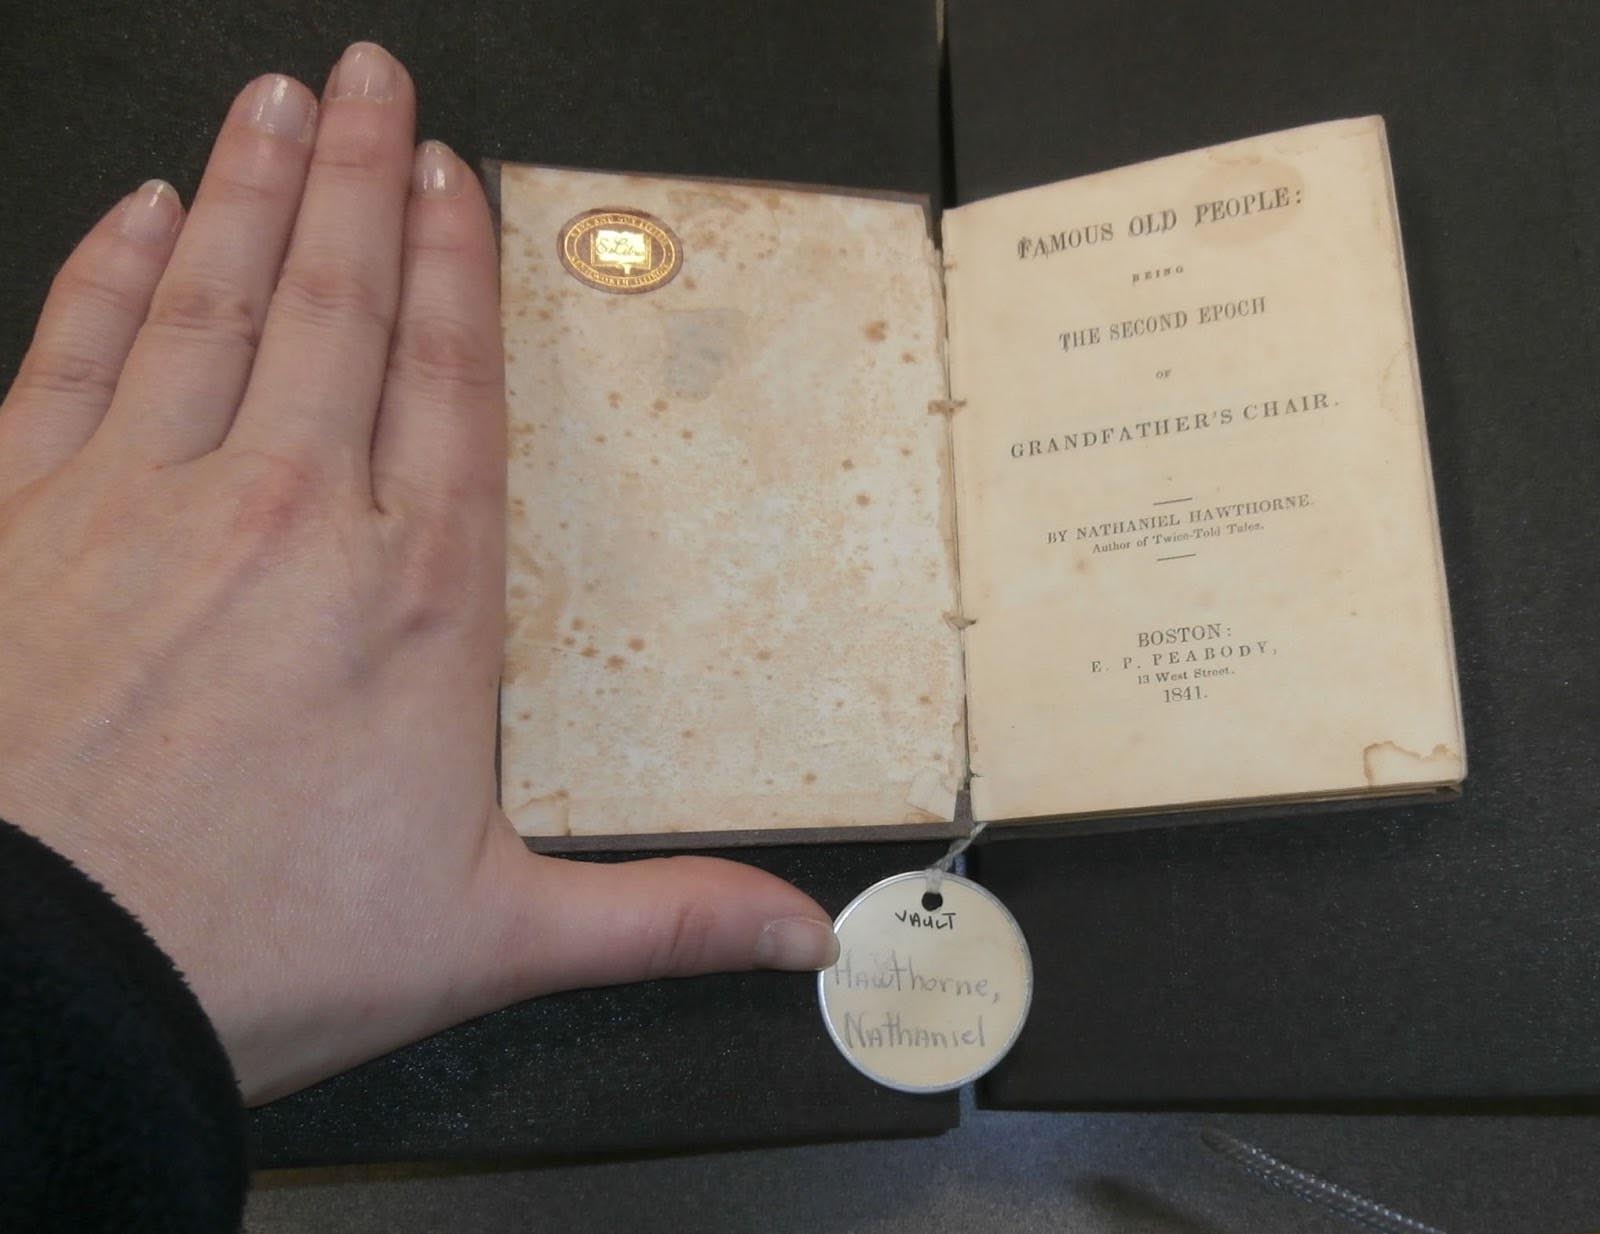 Mini book "Famous Old People: Being the Second Epoch of Grandfather's Chair" by Nathaniel Hawthorne, 1841